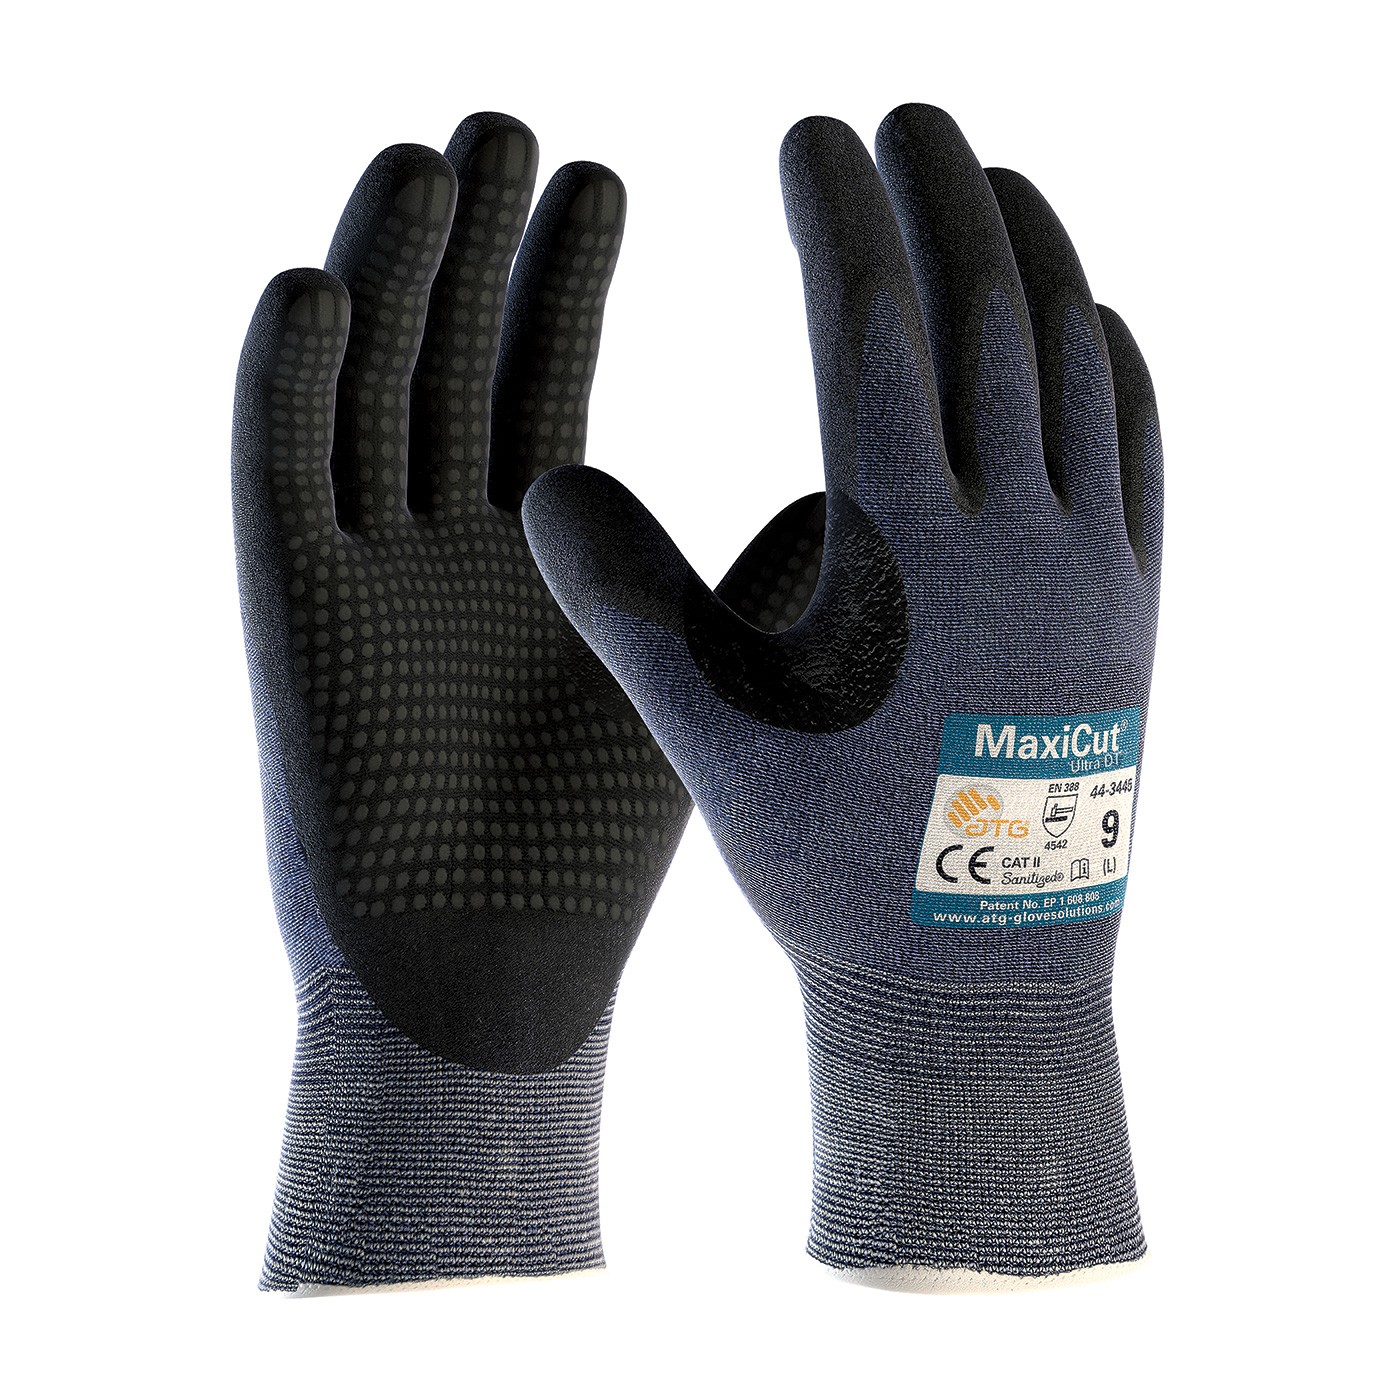 MaxiCut® Ultra DT™ Seamless Knit Engineered Yarn Glove with Premium Nitrile Coated MicroFoam Grip on Palm & Fingers - Micro Dot Palm (#44-3445)